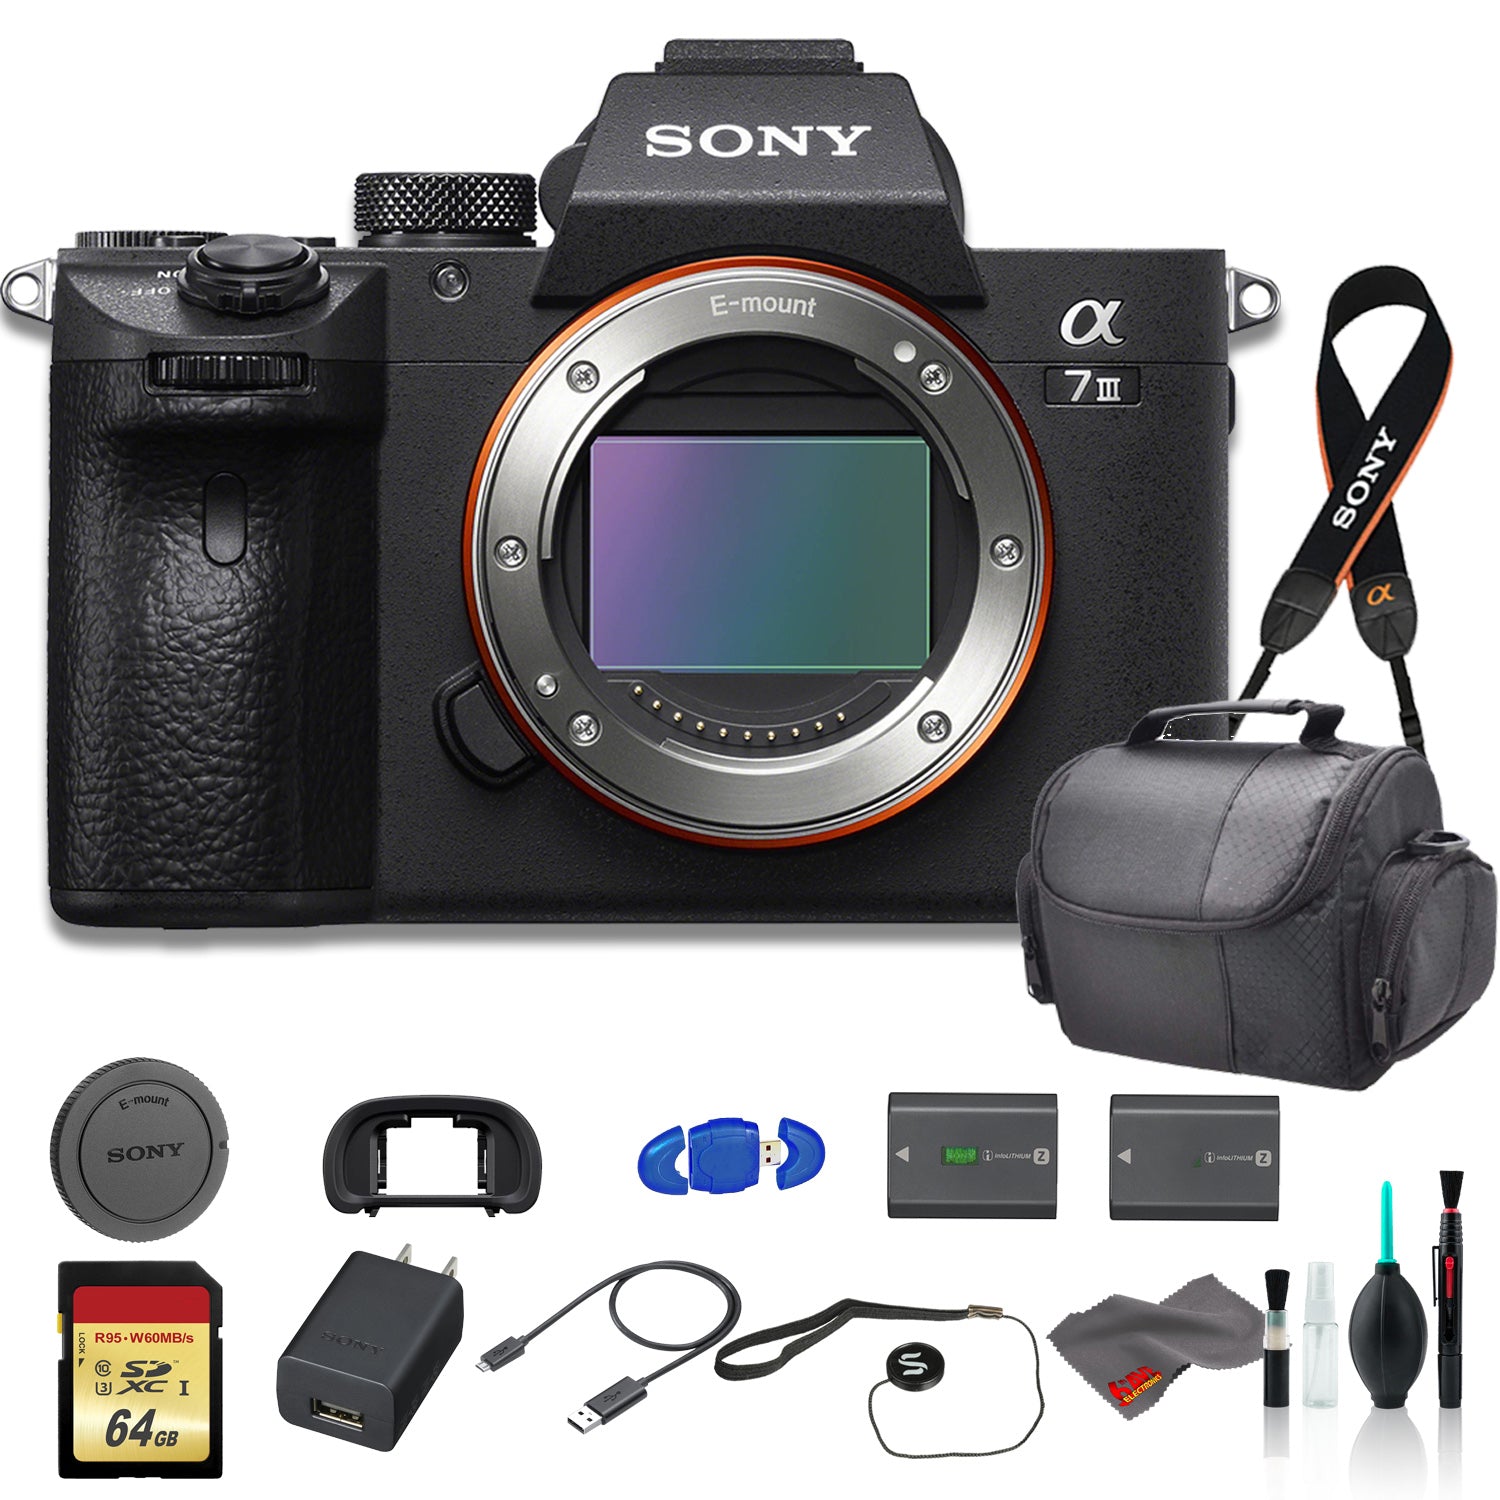 Sony Alpha a7 III Mirrorless Digital Camera (Body Only) Bundle - With Bag, Extra Battery, 64GB Memory Card